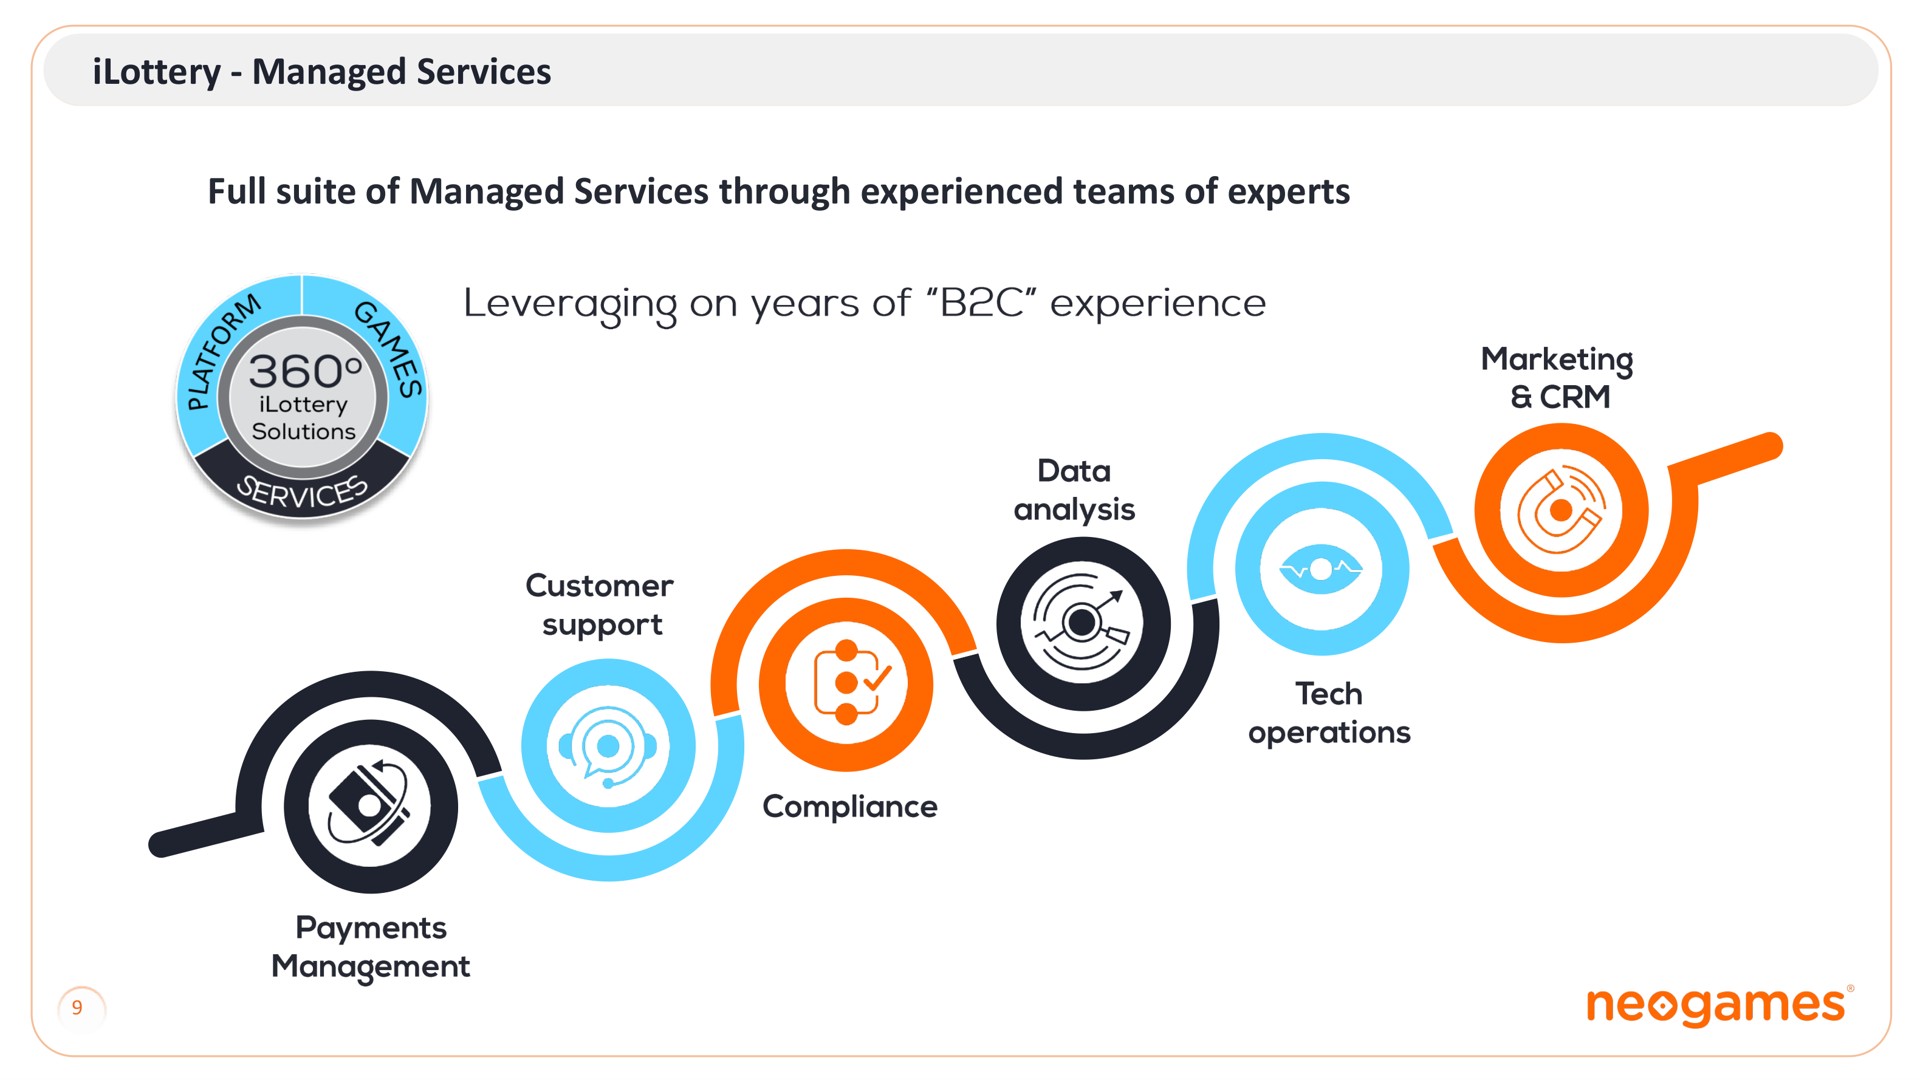 managed services full suite of managed services through experienced teams of experts | Neogames